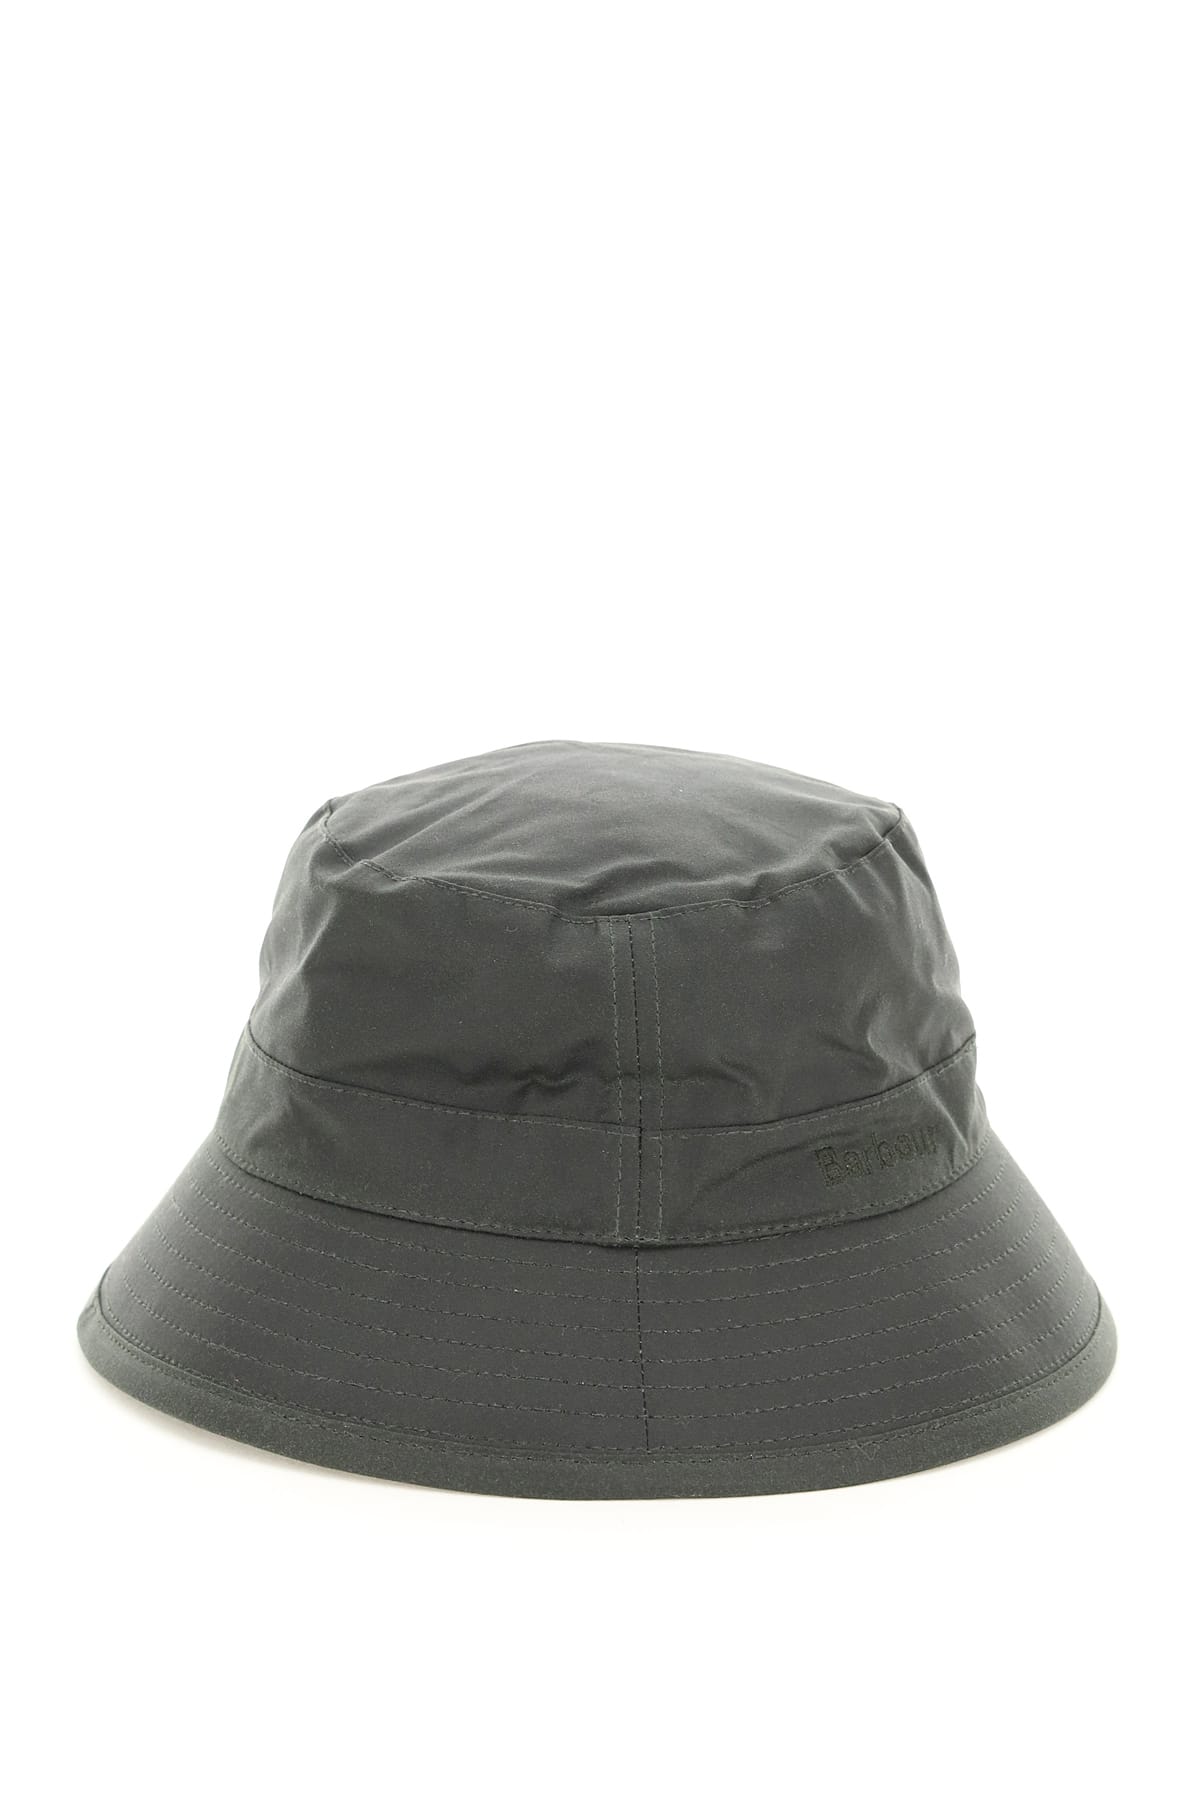 Barbour Waxed Bucket Hat In Sage (green)